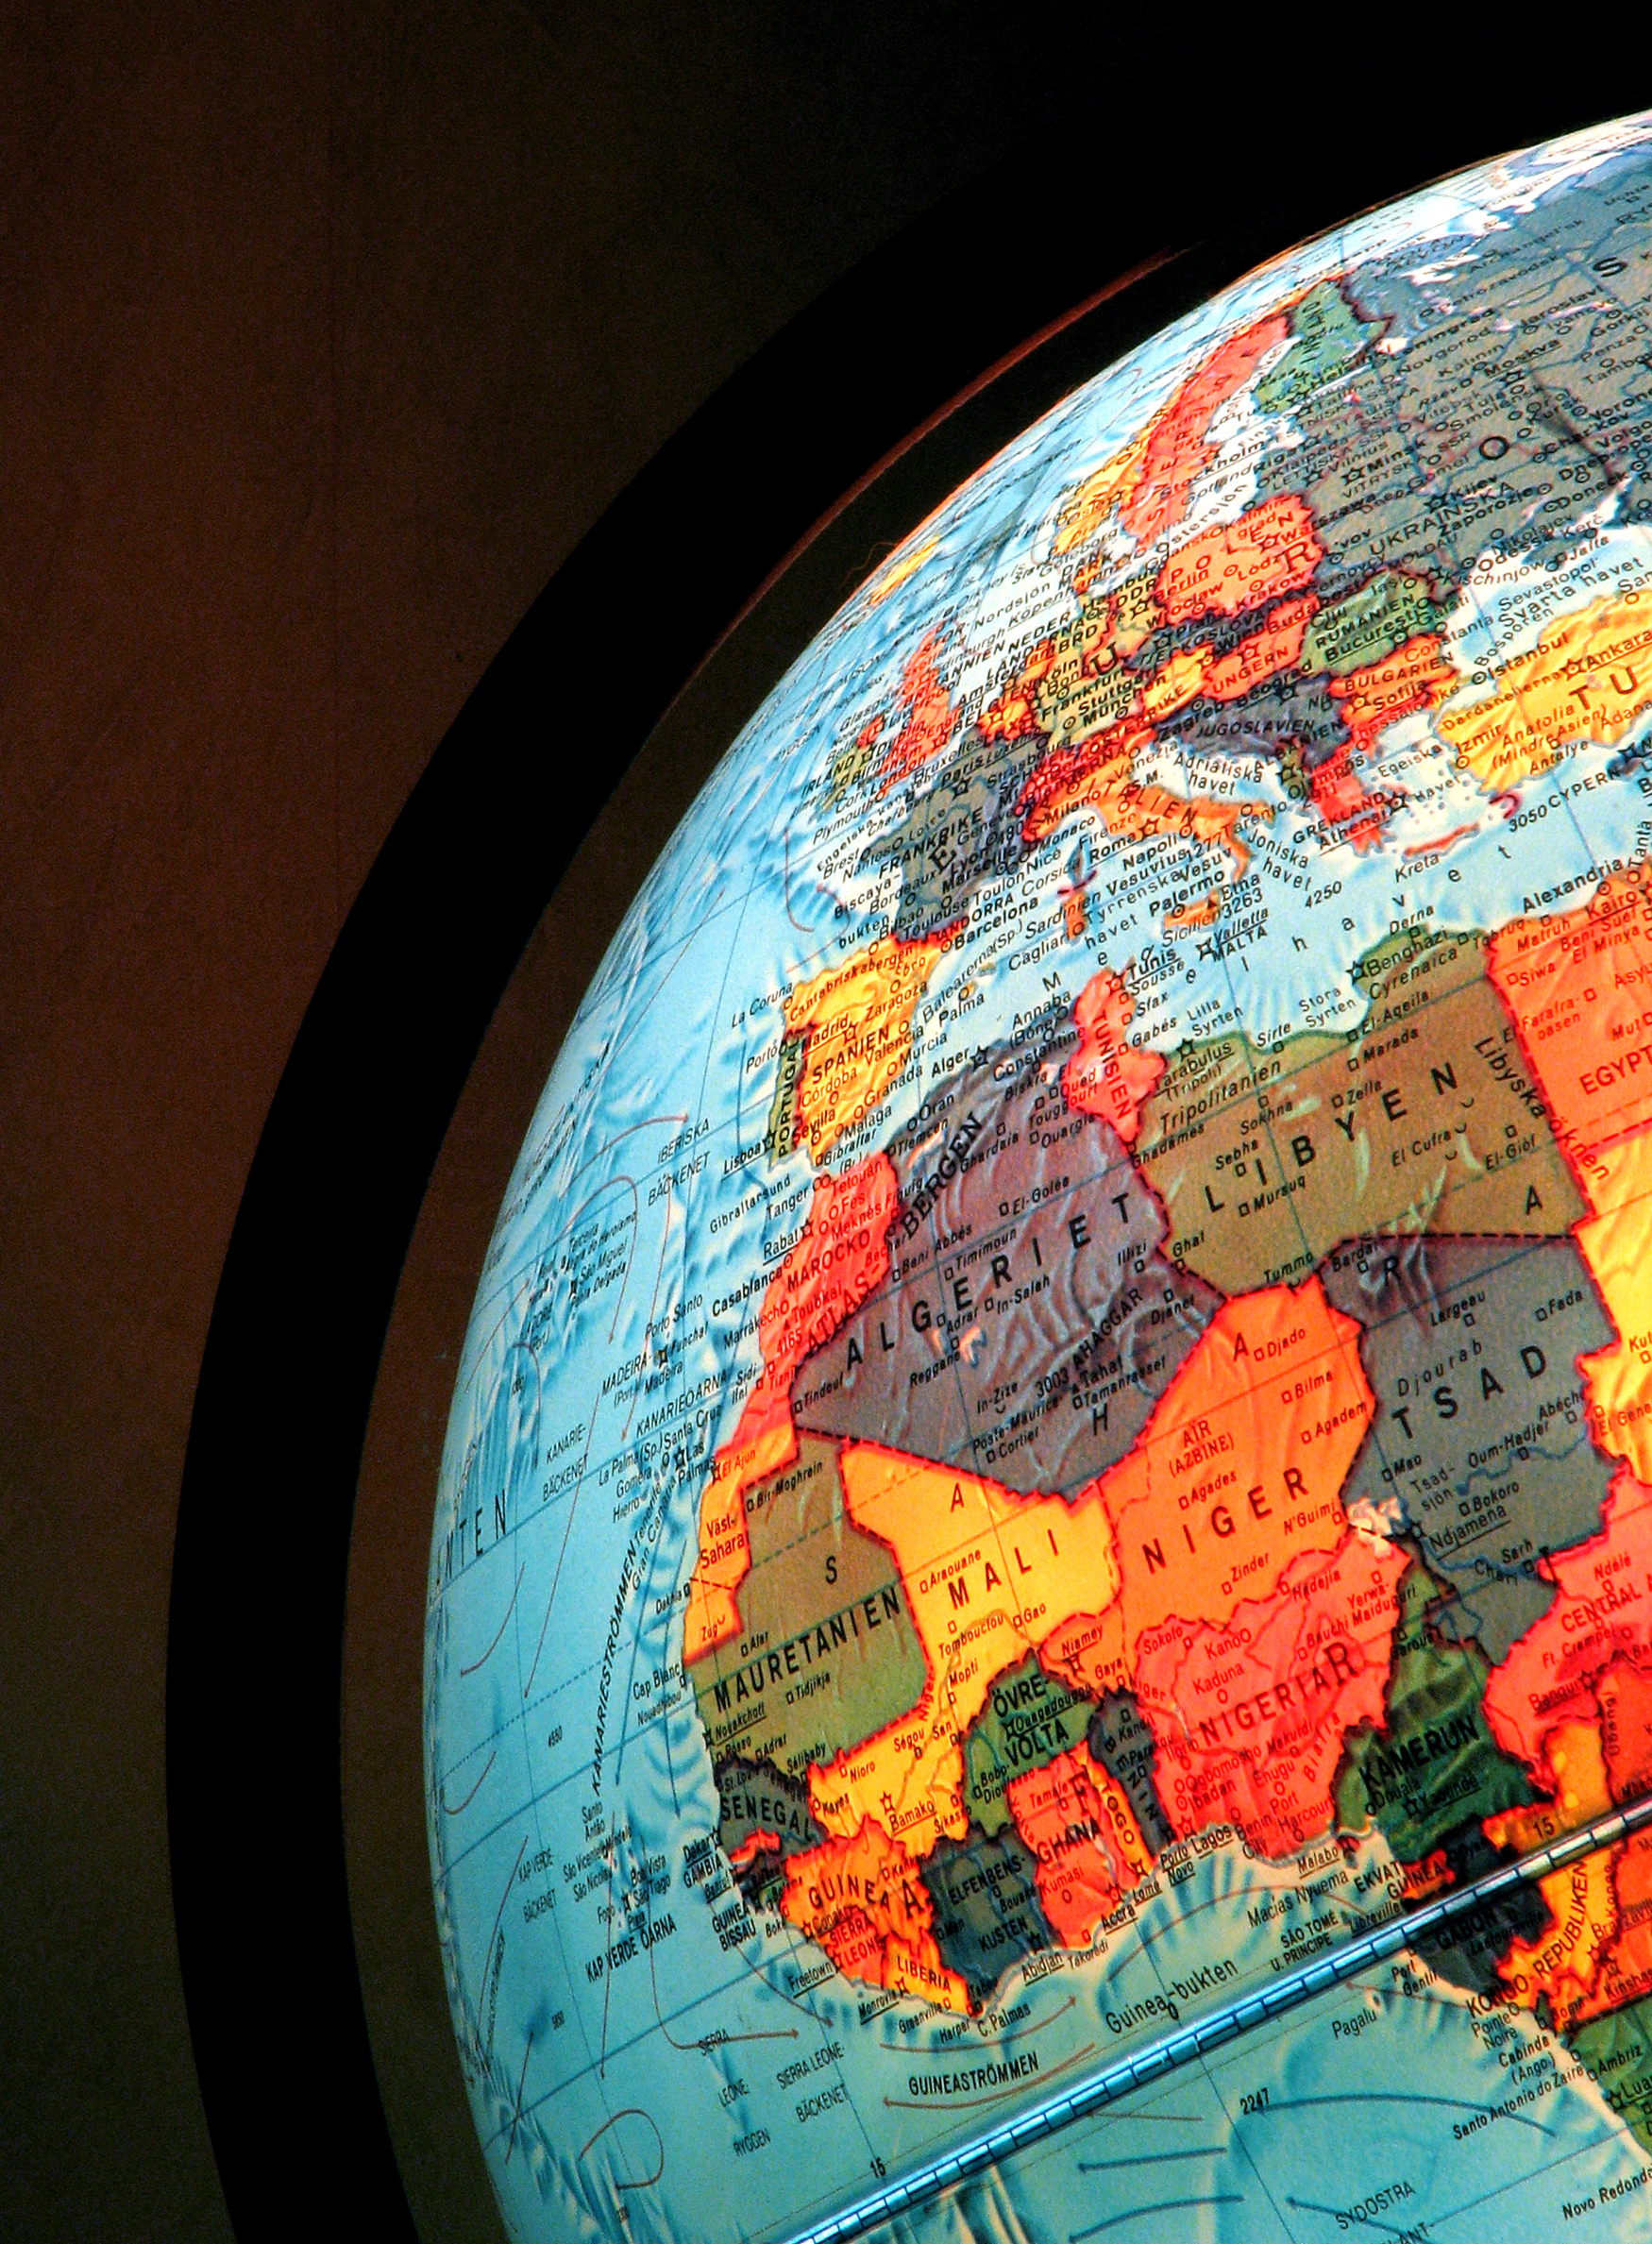 A globe, turned to show part of Africa and Europe. Image from FreeImages.com (Ljungblom).